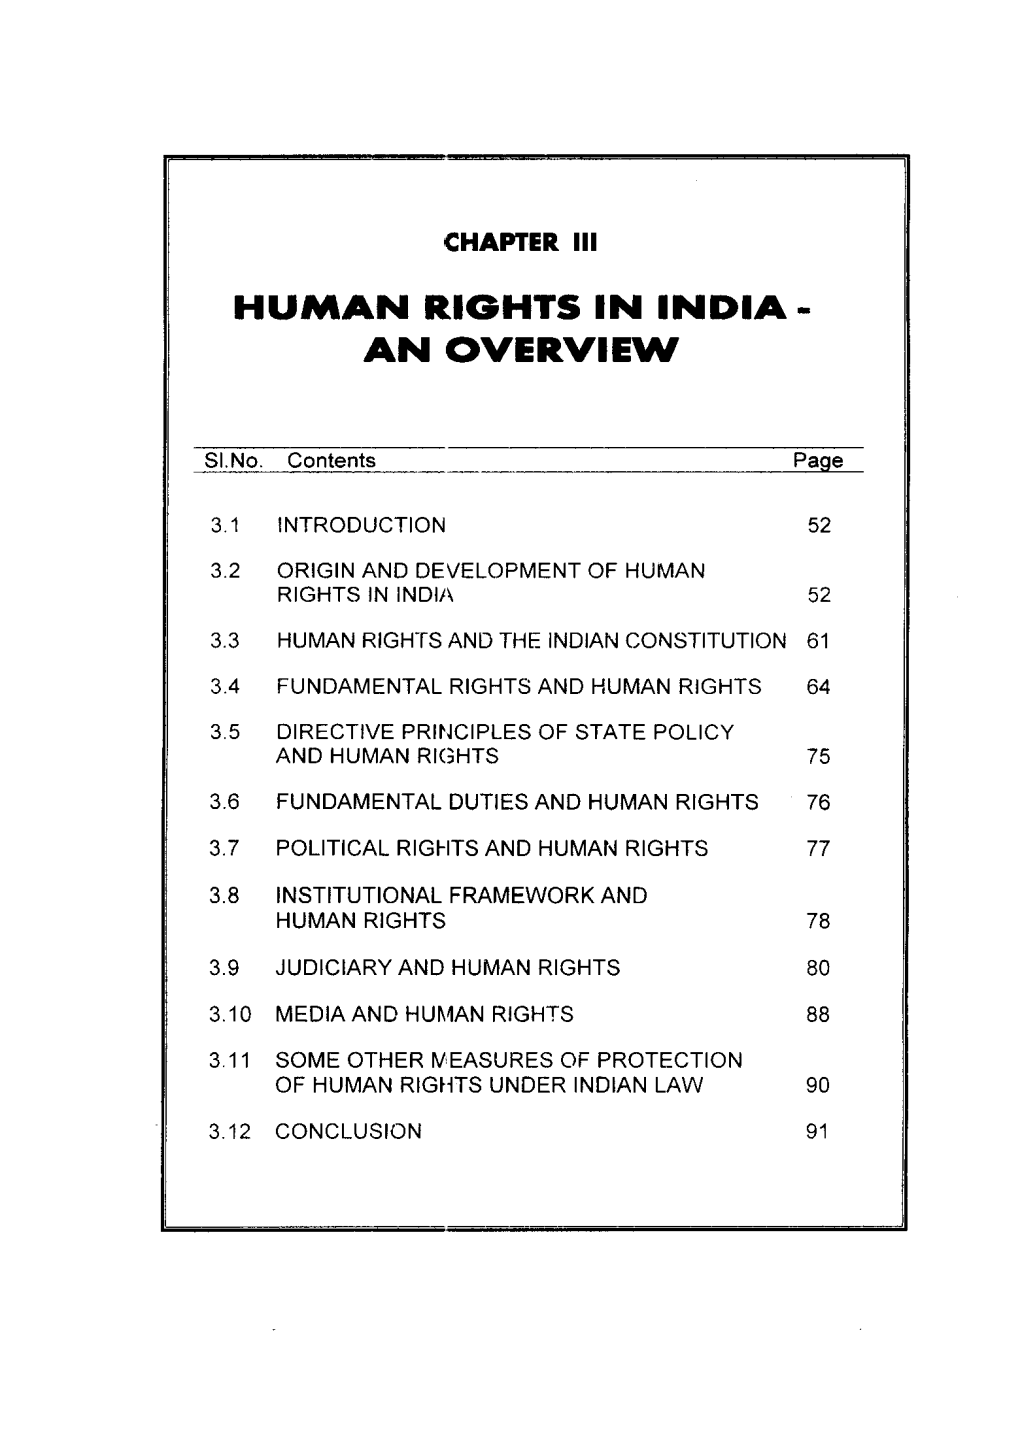 Human Rights in India - an Overview